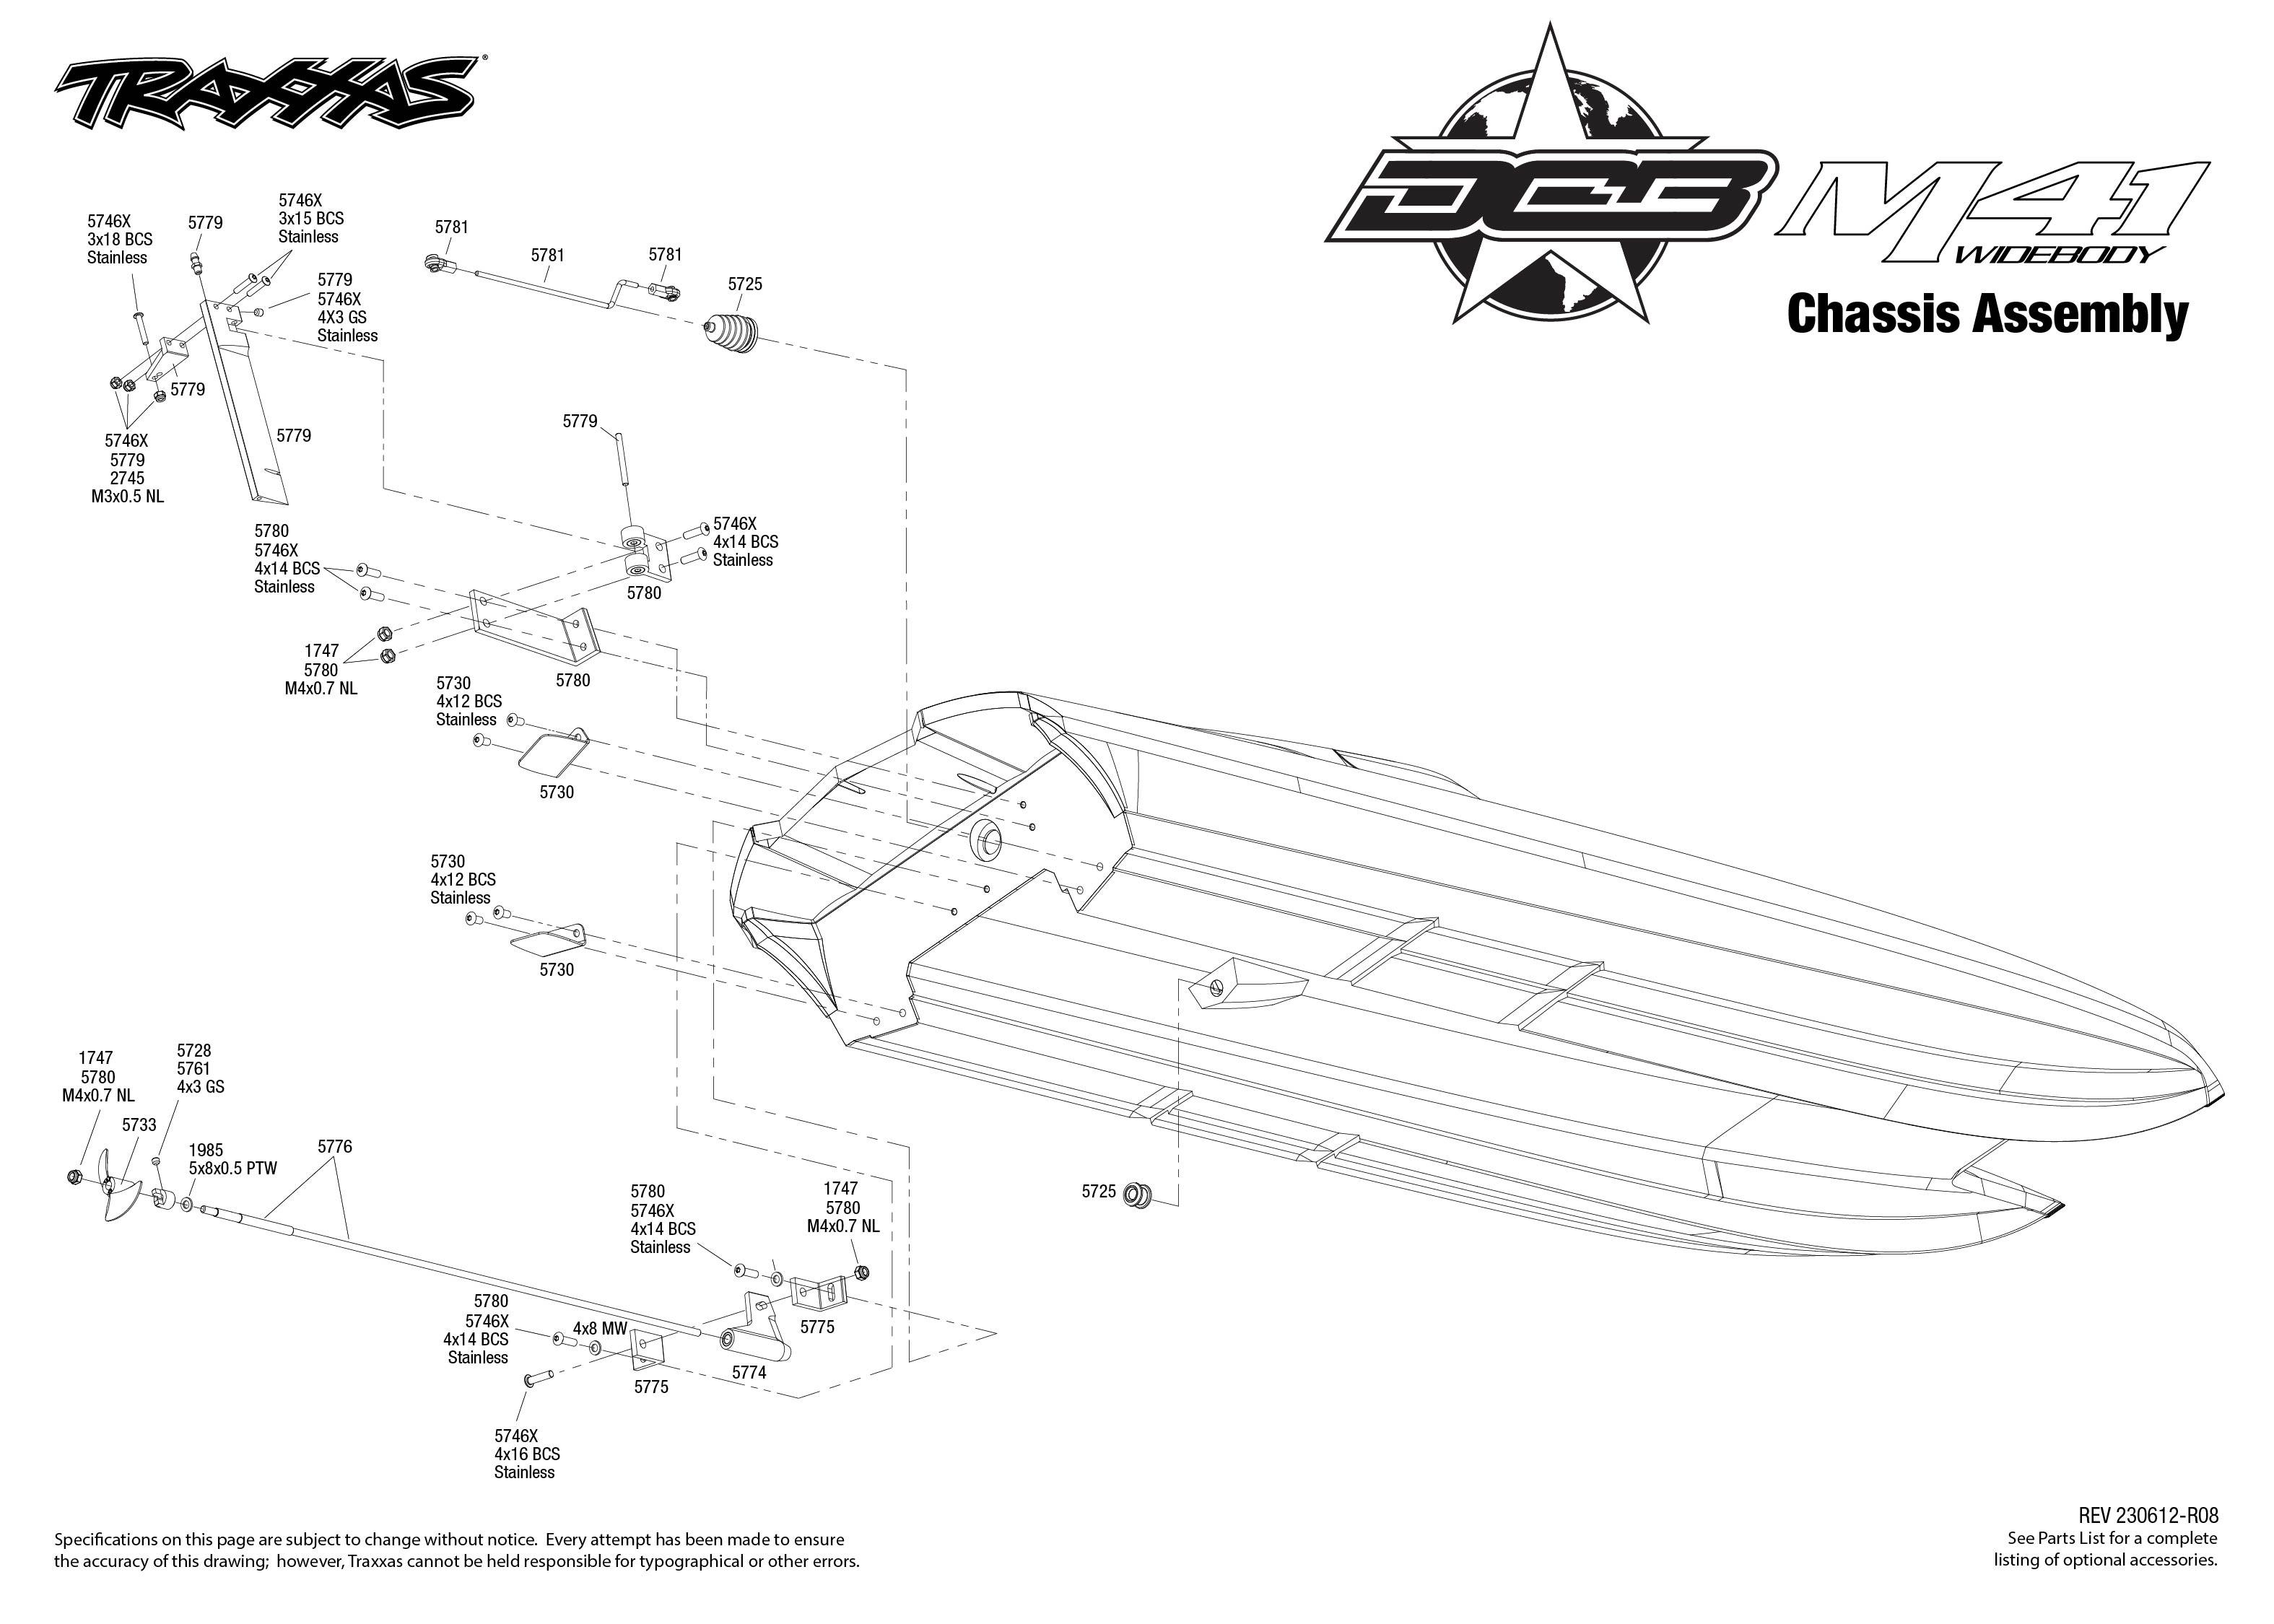 Traxxas Dcb: Features and User Guide Breakdown